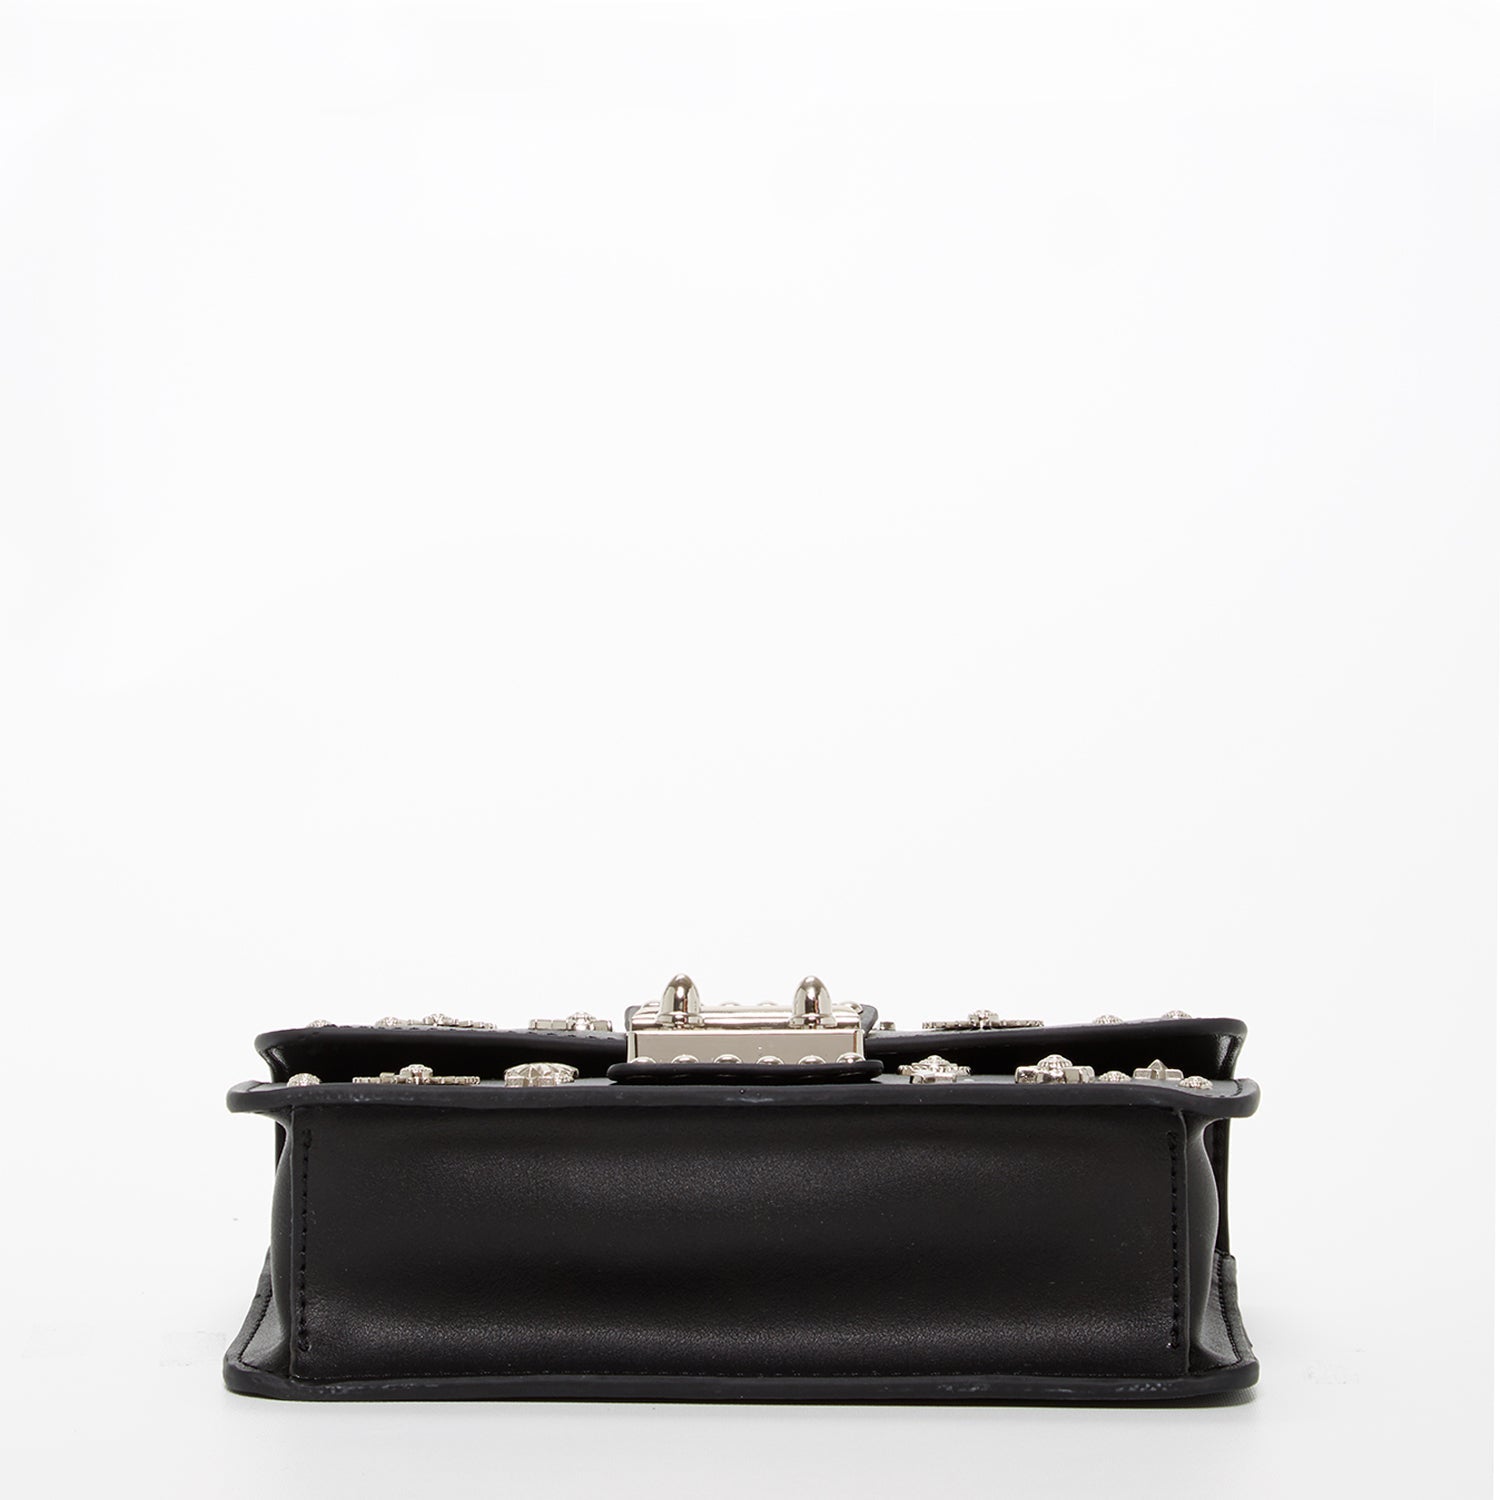 The Hollywood Studded Leather Crossbody Black - Guy Christopher 